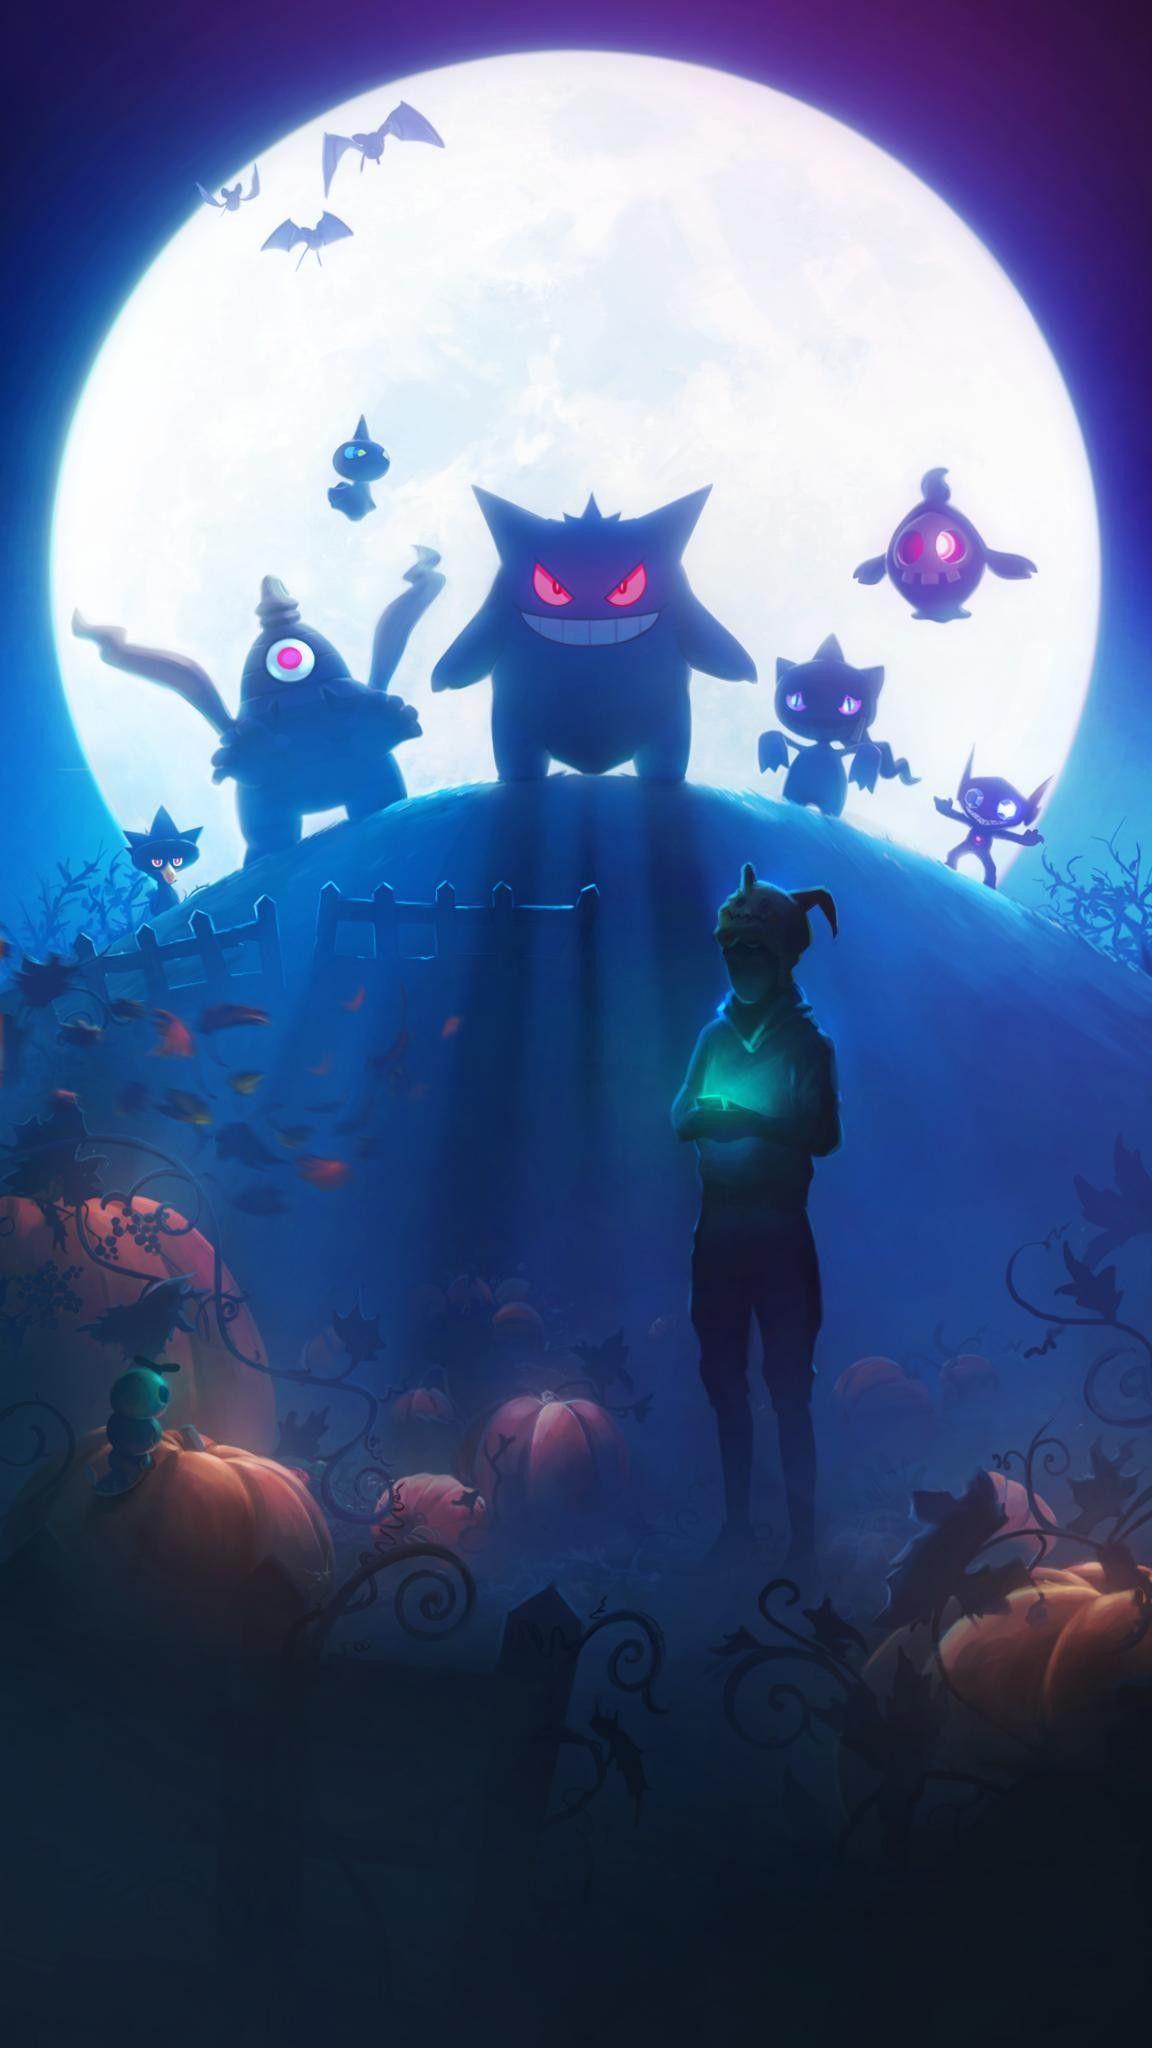 Official Pokémon Go wallpapers for 2018